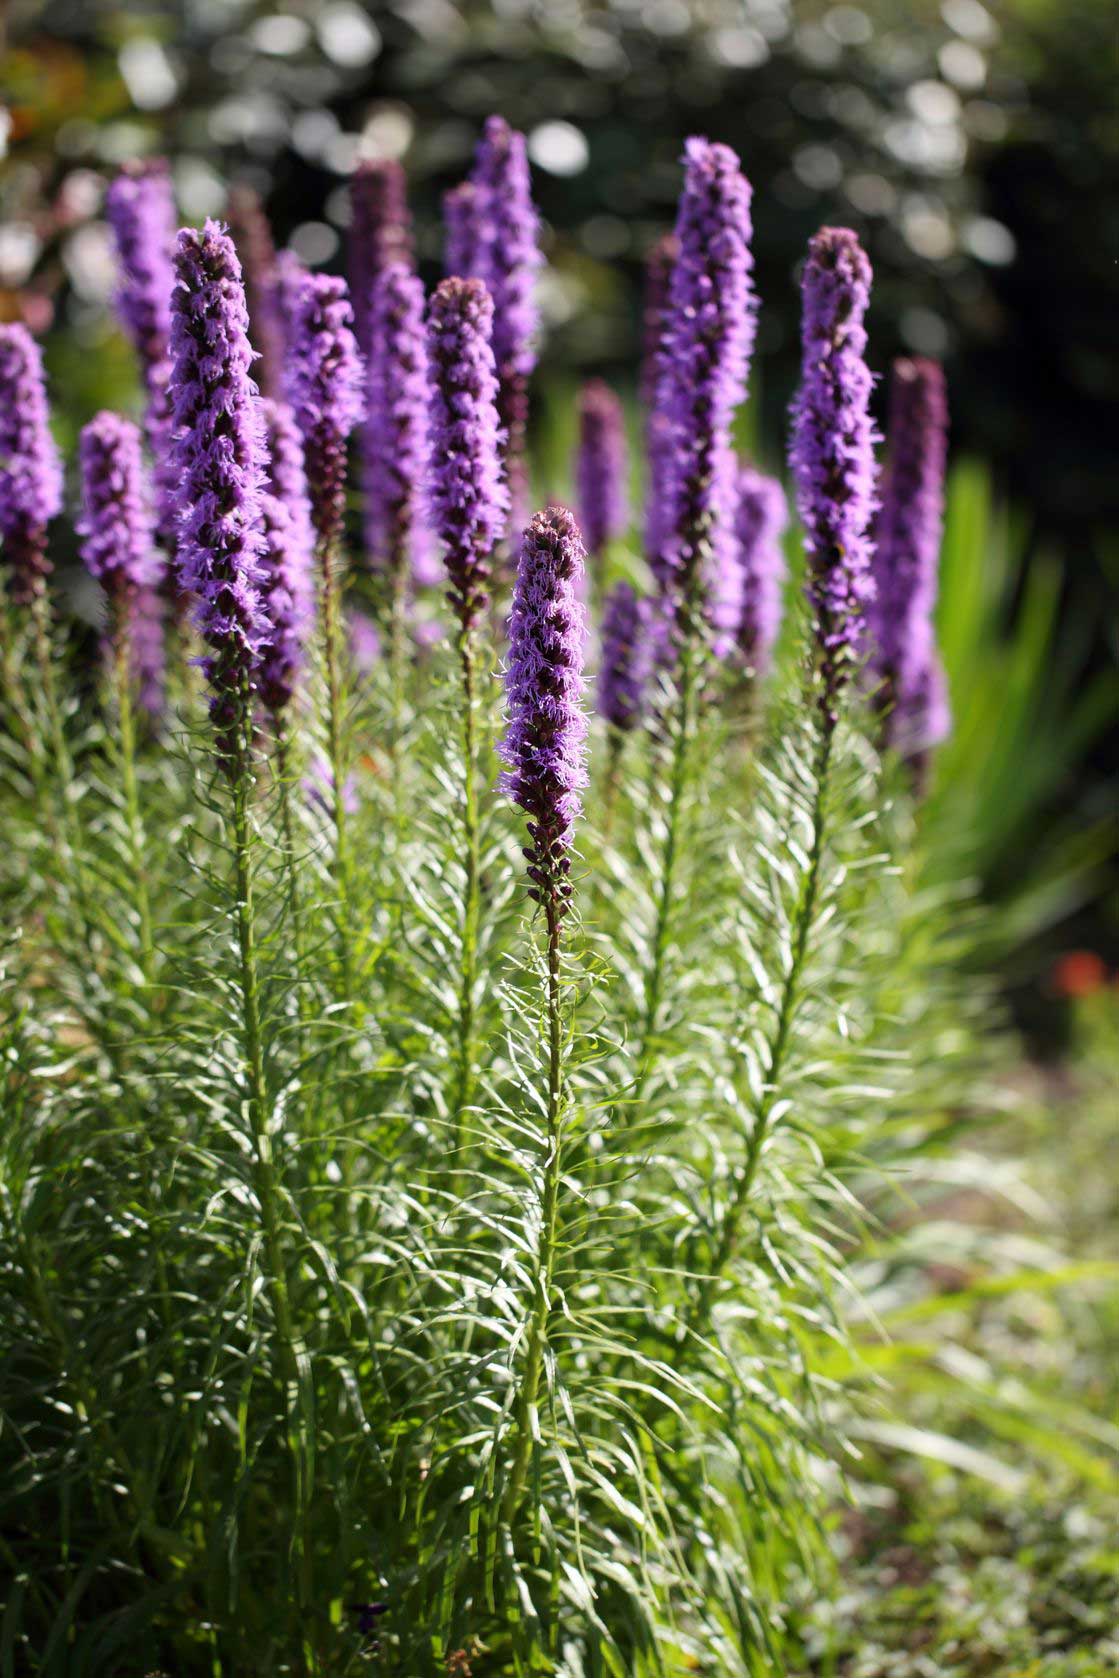 Liatris is a sun loving perennial with nice vertical flowers.